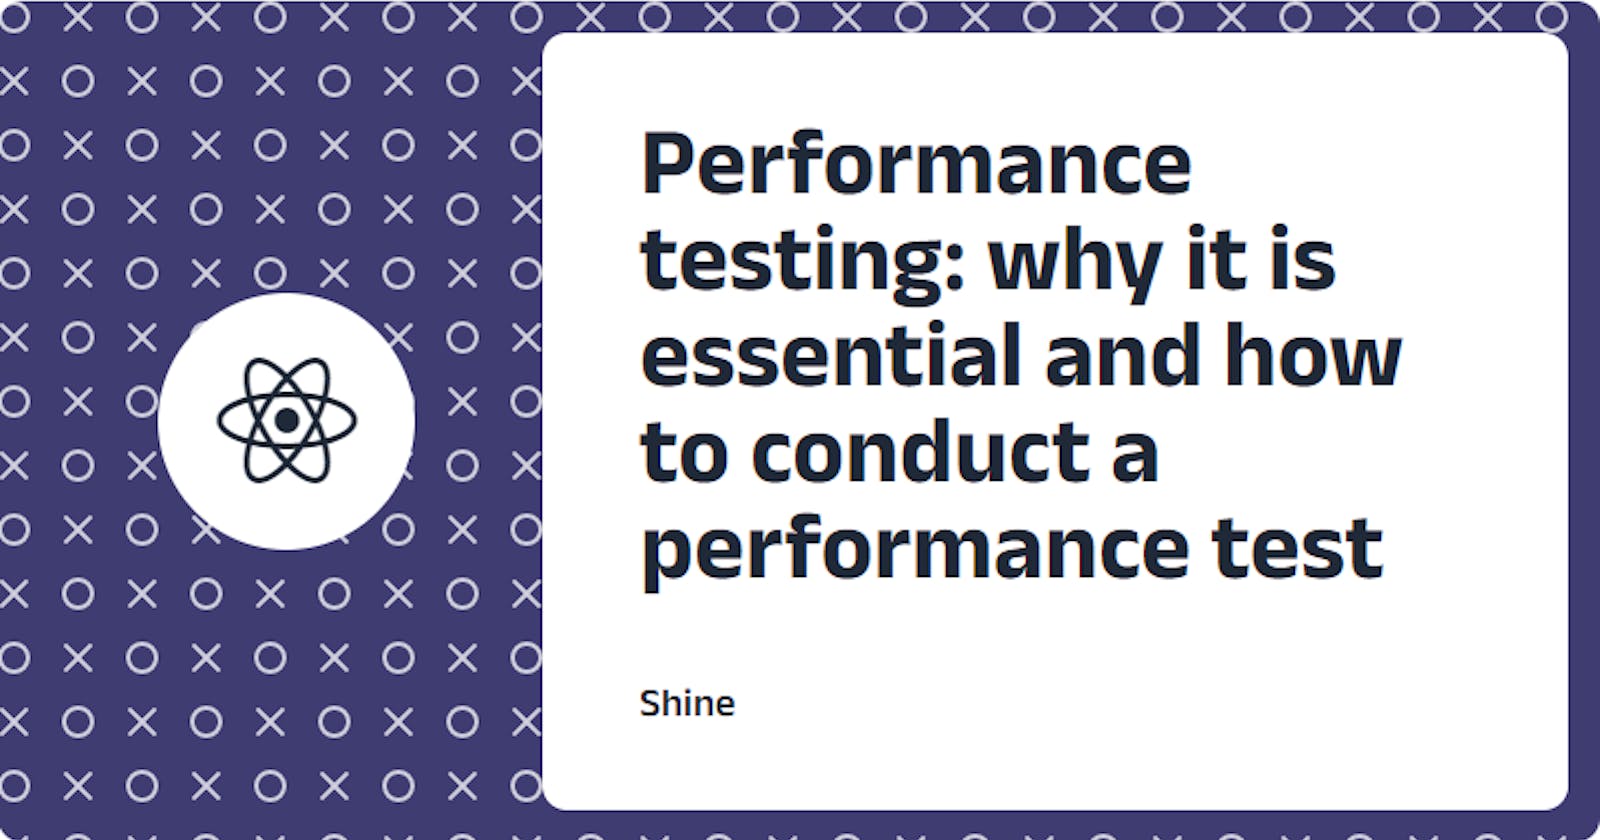 Performance testing: why it is essential and how to conduct a performance test